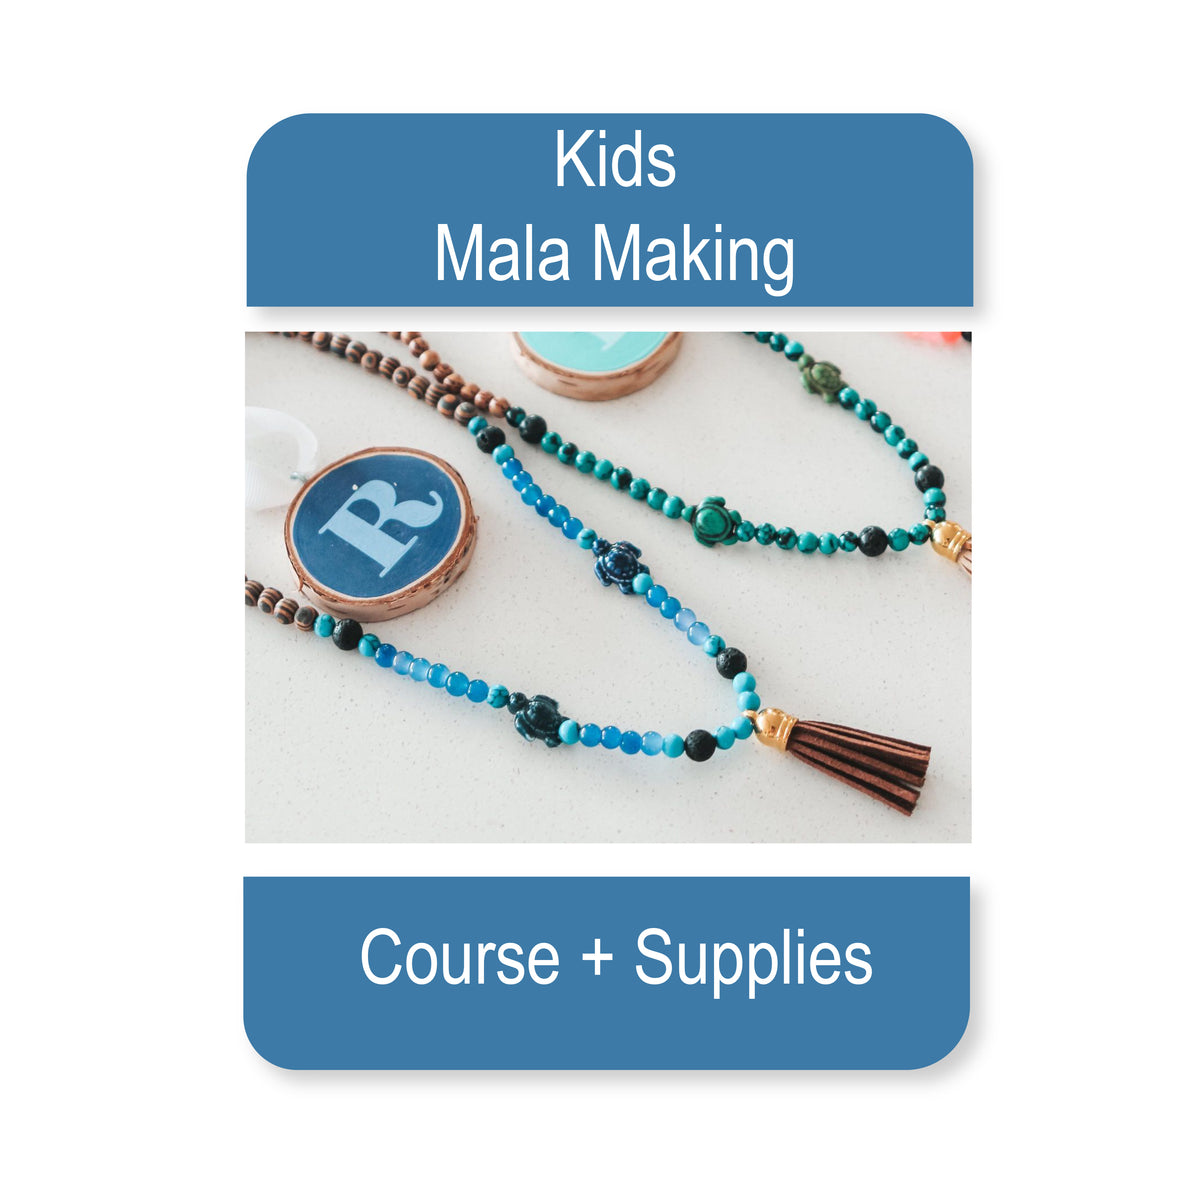 Mala Making for Kids - eCourse or InPerson